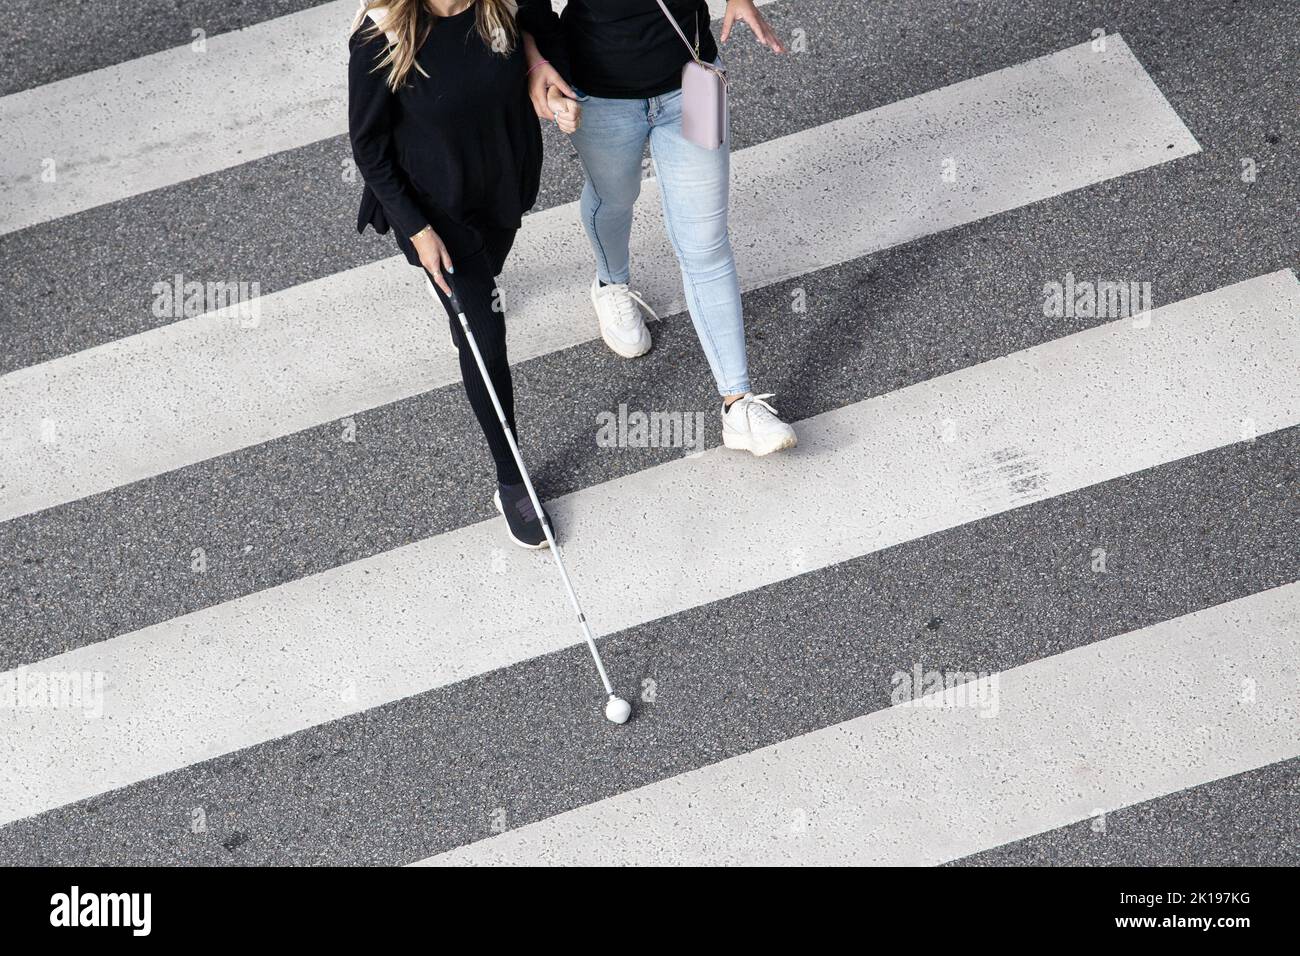 Scene of a Blind woman walking on zebra crossing helped by another person using her white cane. Help in the early stages of blindness Stock Photo